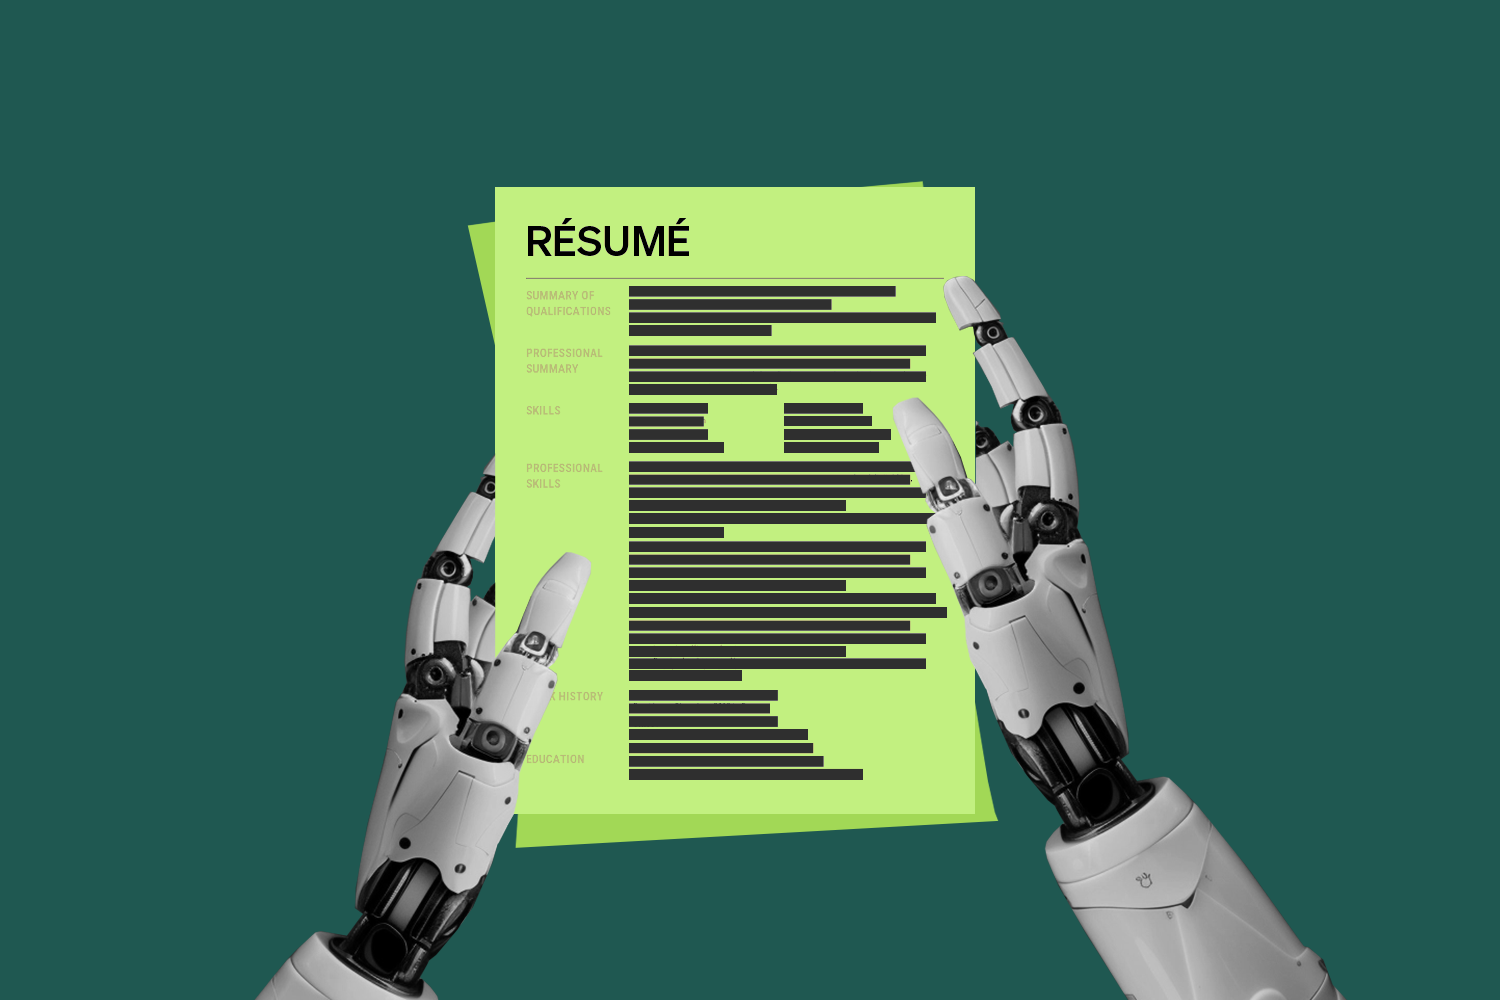 AI robot arms holding out a resume in its hands scanning it green